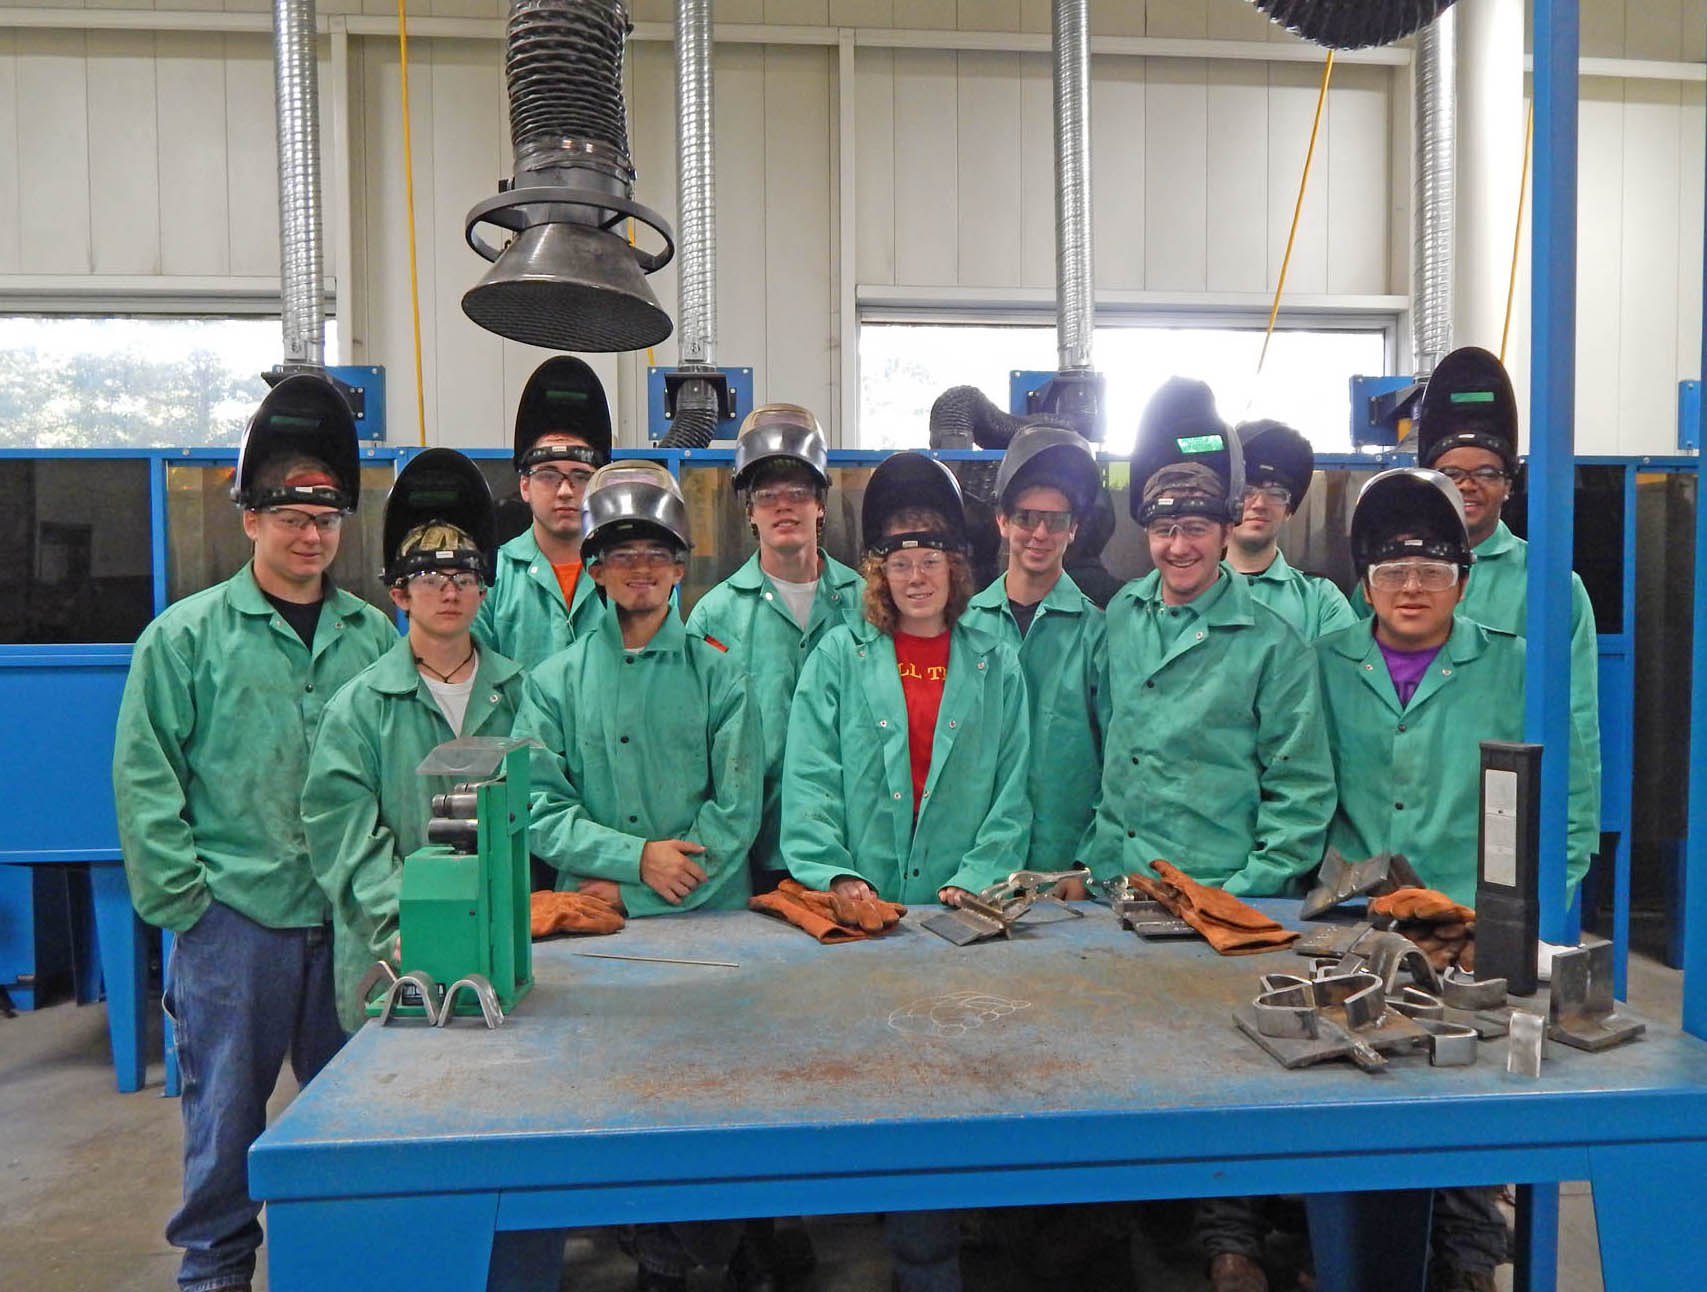 Read the full story, Caterpillar gives welding apprentices an 